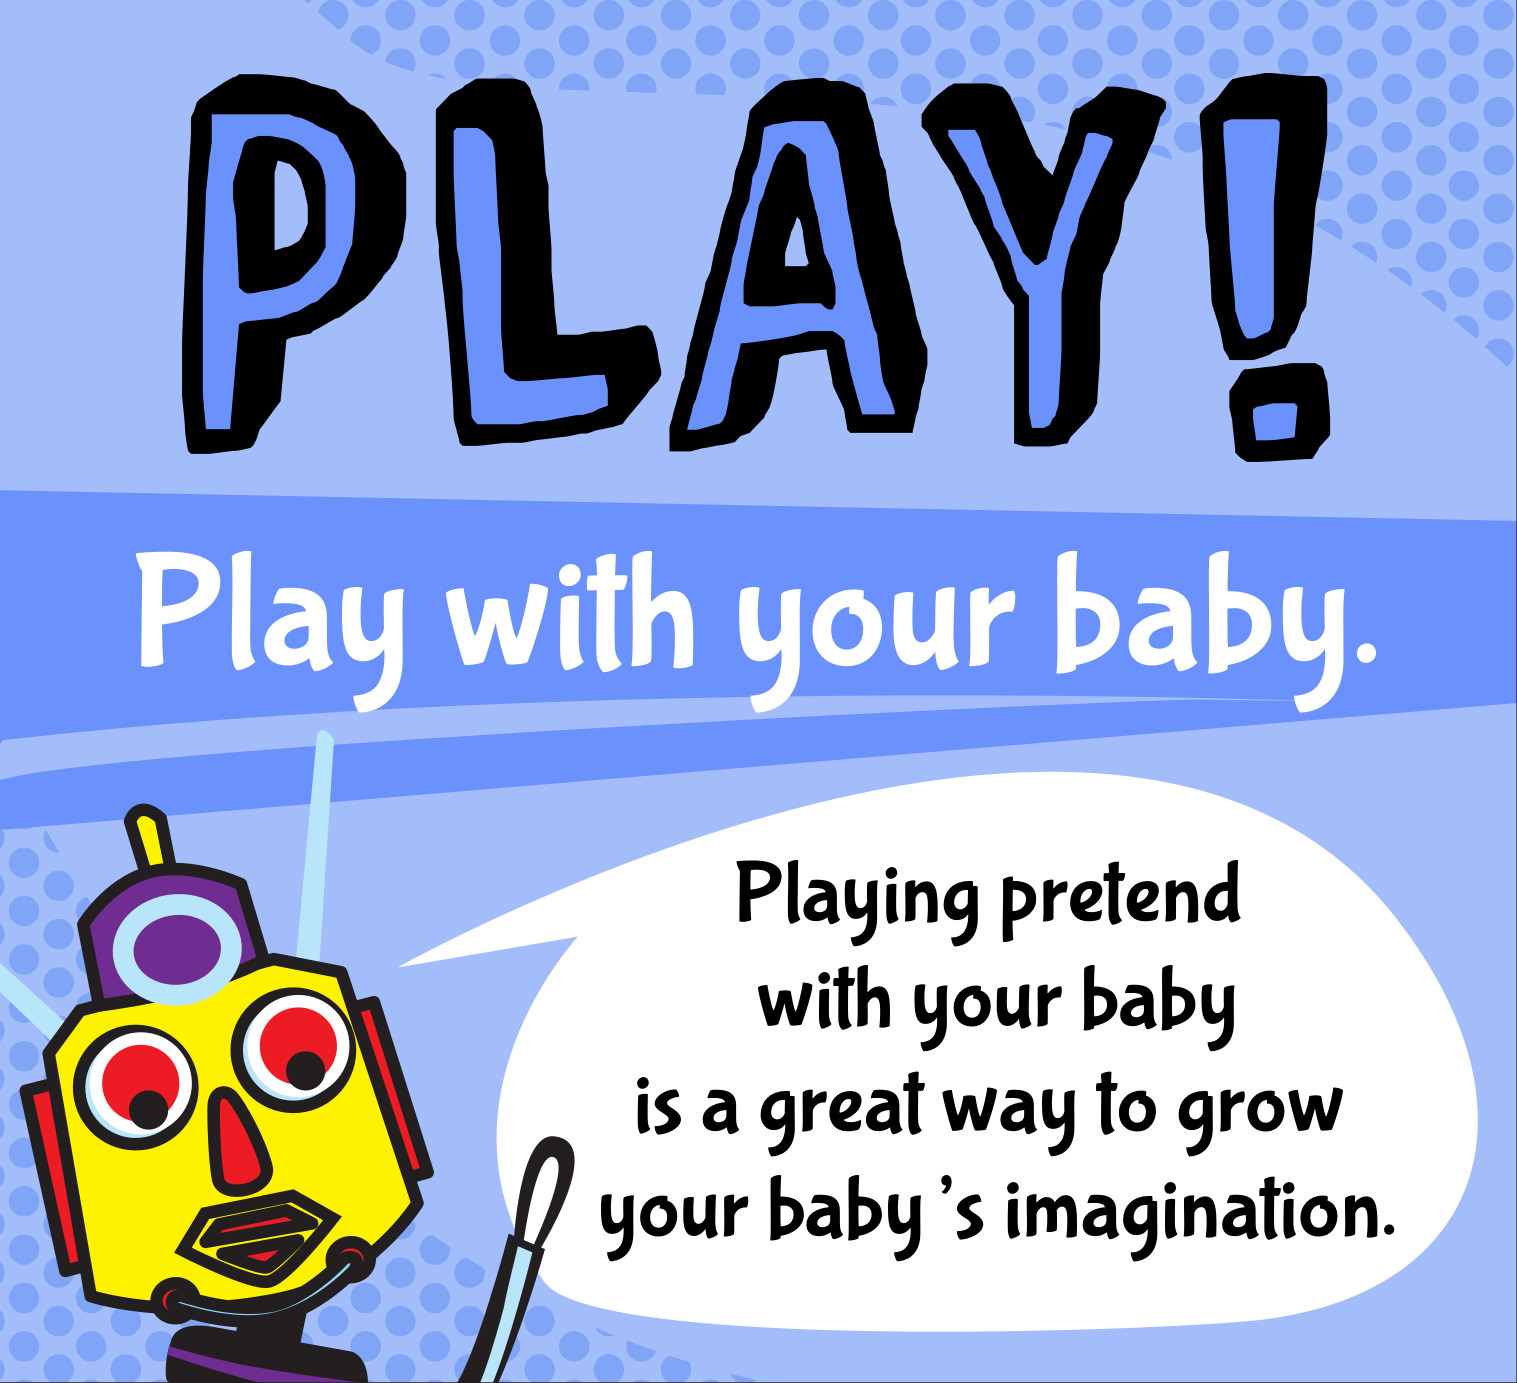 Play with your baby